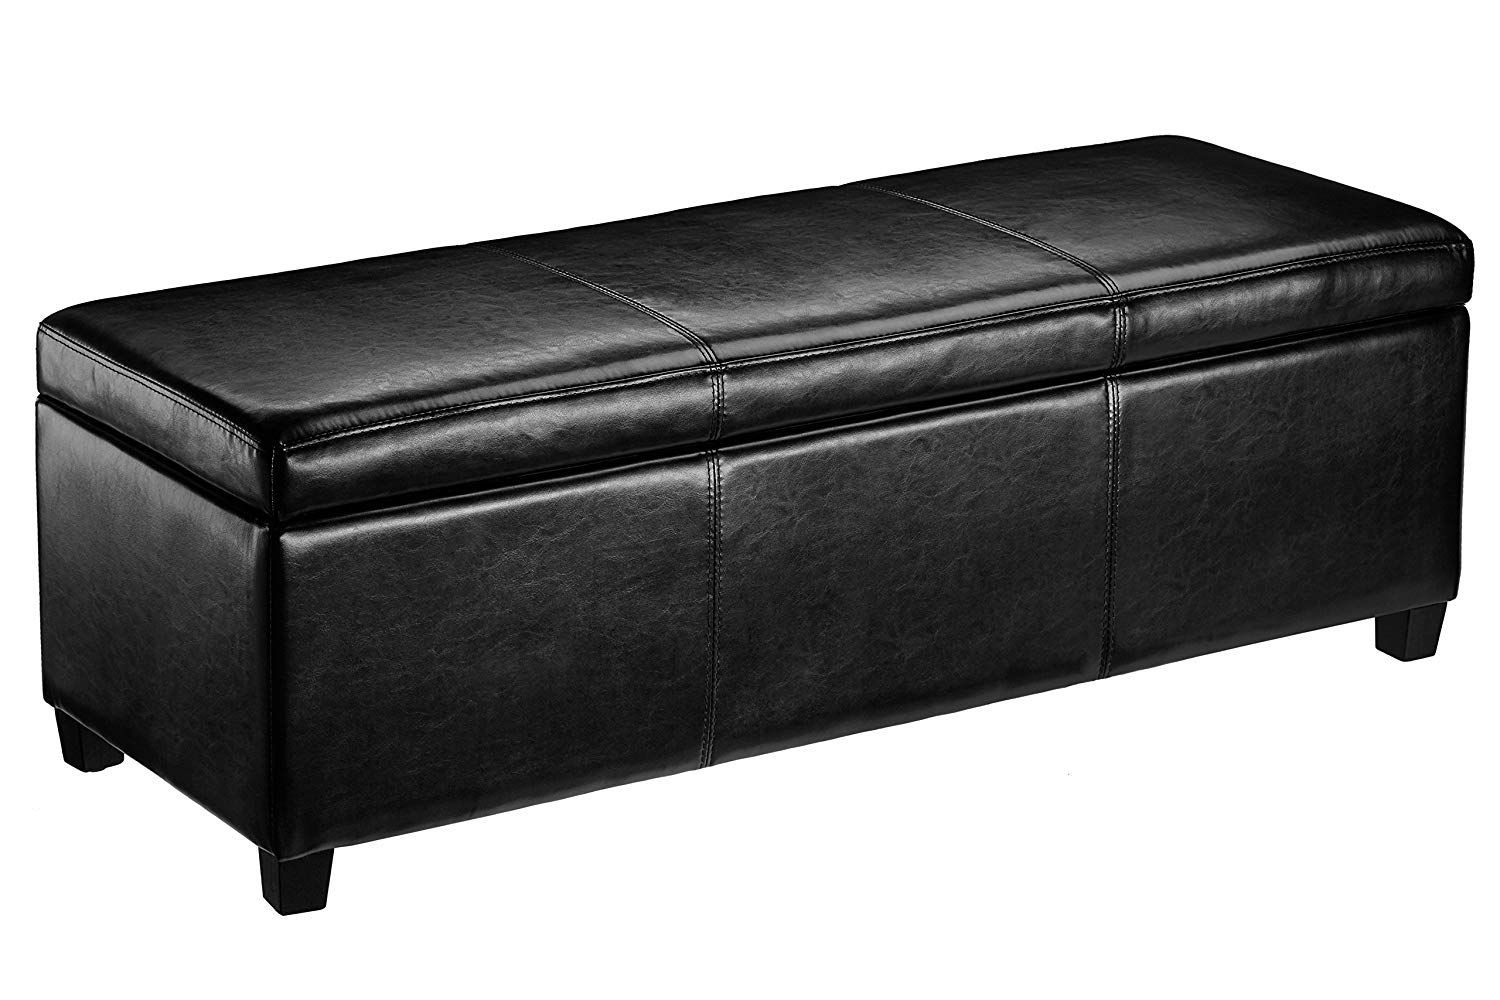 First Hill Madison Rectangular Faux Leather Storage Ottoman Bench Throughout Black Leather Ottomans (View 3 of 20)